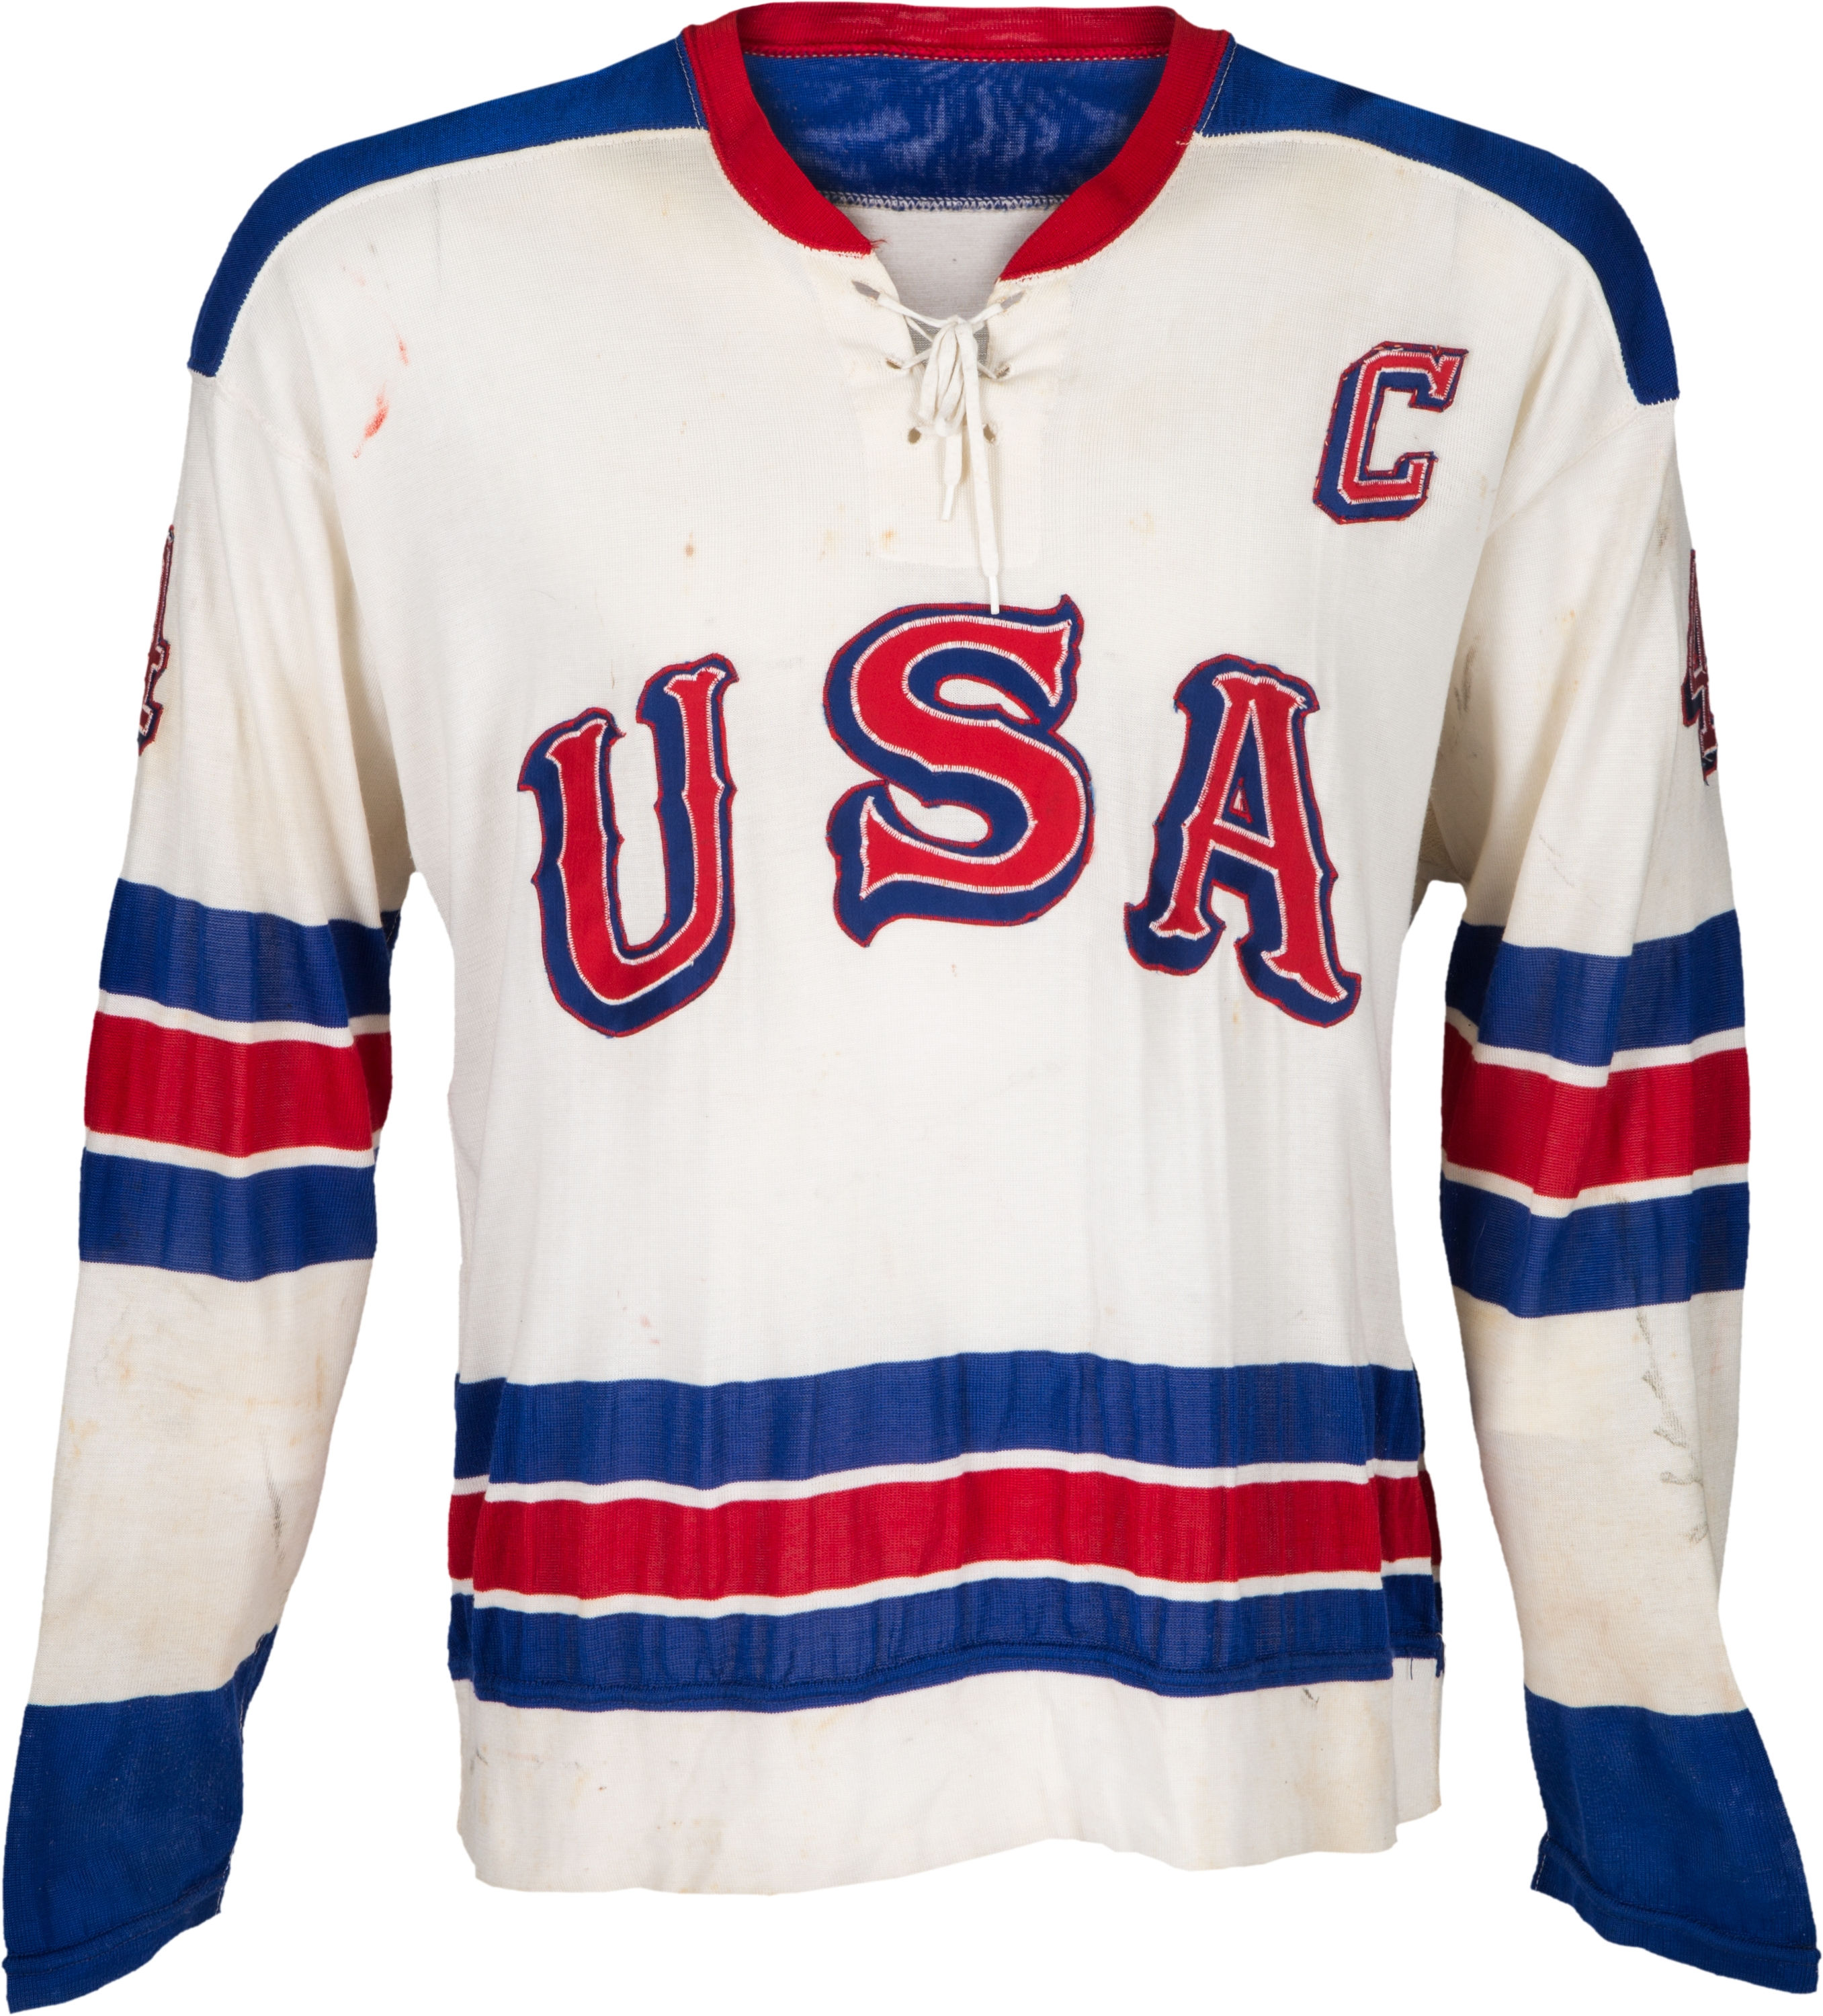 U.S. Jerseys Unveiled for WJC Outdoor Game